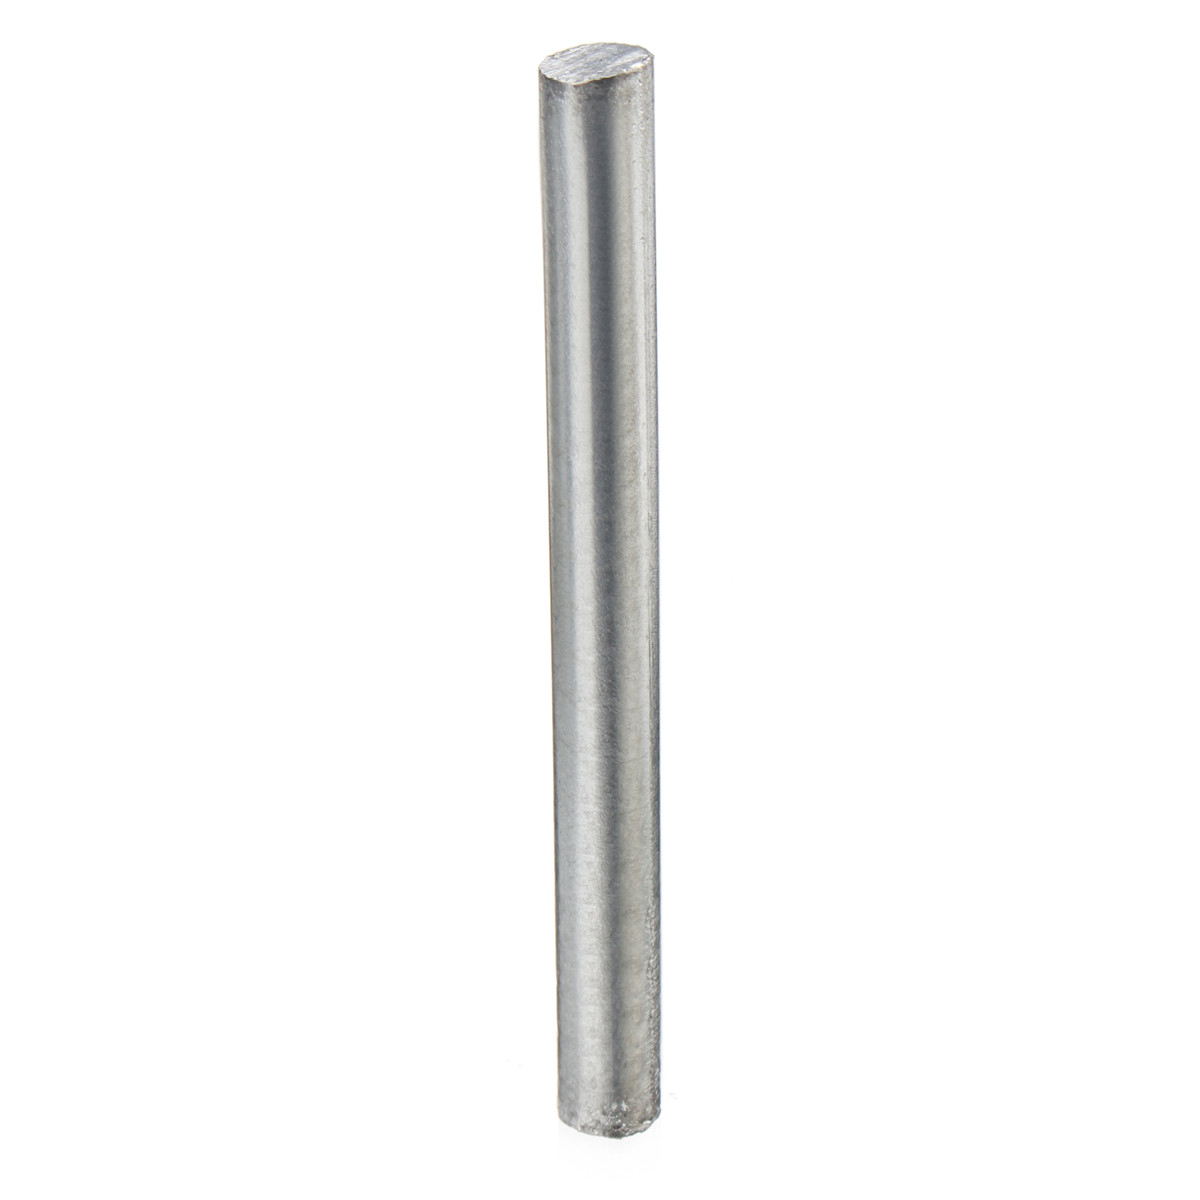 Zn 99.95% Purity Zinc Rod Solid Round Bar 0.4"x 4" Anode Electroplating 10*100mm